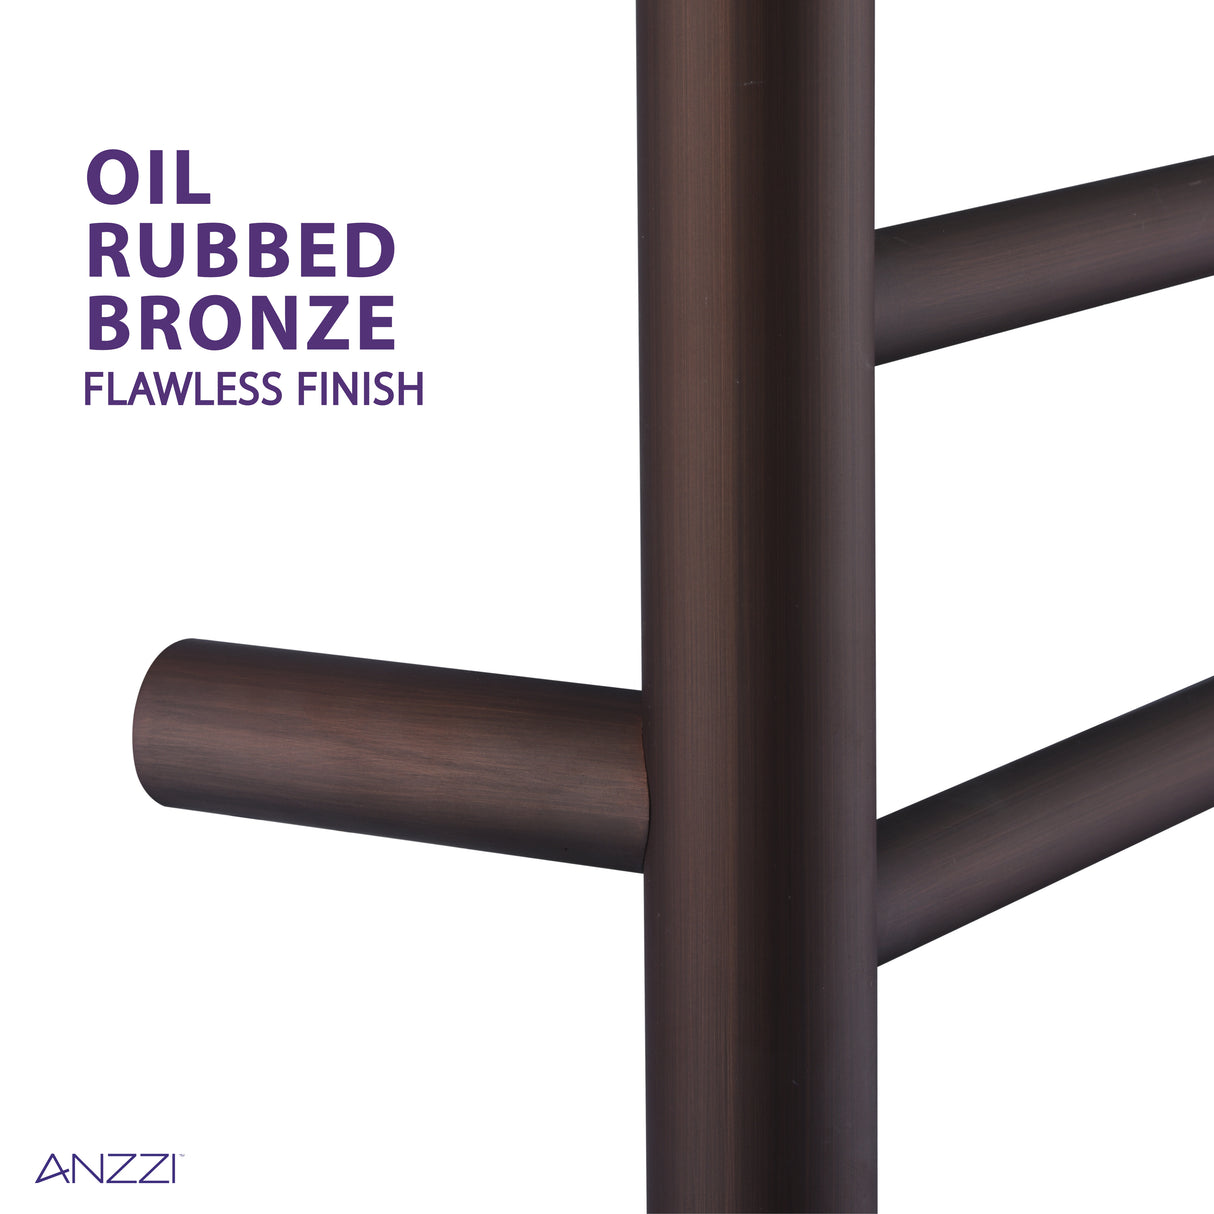 ANZZI TW-AZ027ORB Gown 7-Bar Stainless Steel Wall Mounted Towel Warmer in Oil Rubbed Bronze